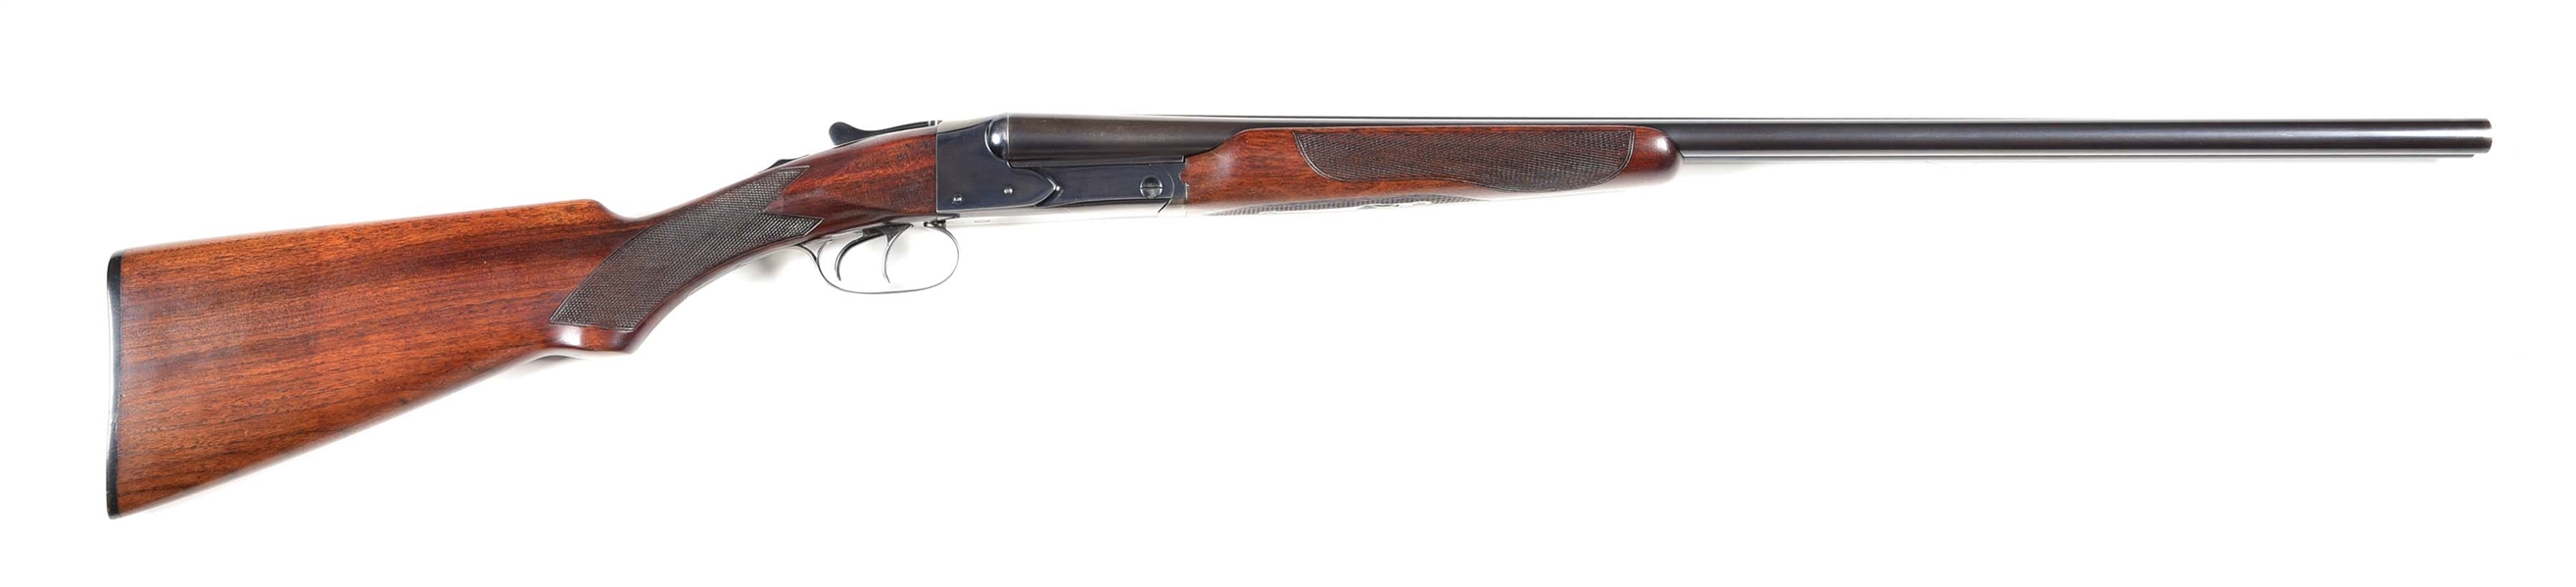 (C) 1935 MANUFACTURED WINCHESTER MODEL 21 20 BORE SIDE BY SIDE SHOTGUN.